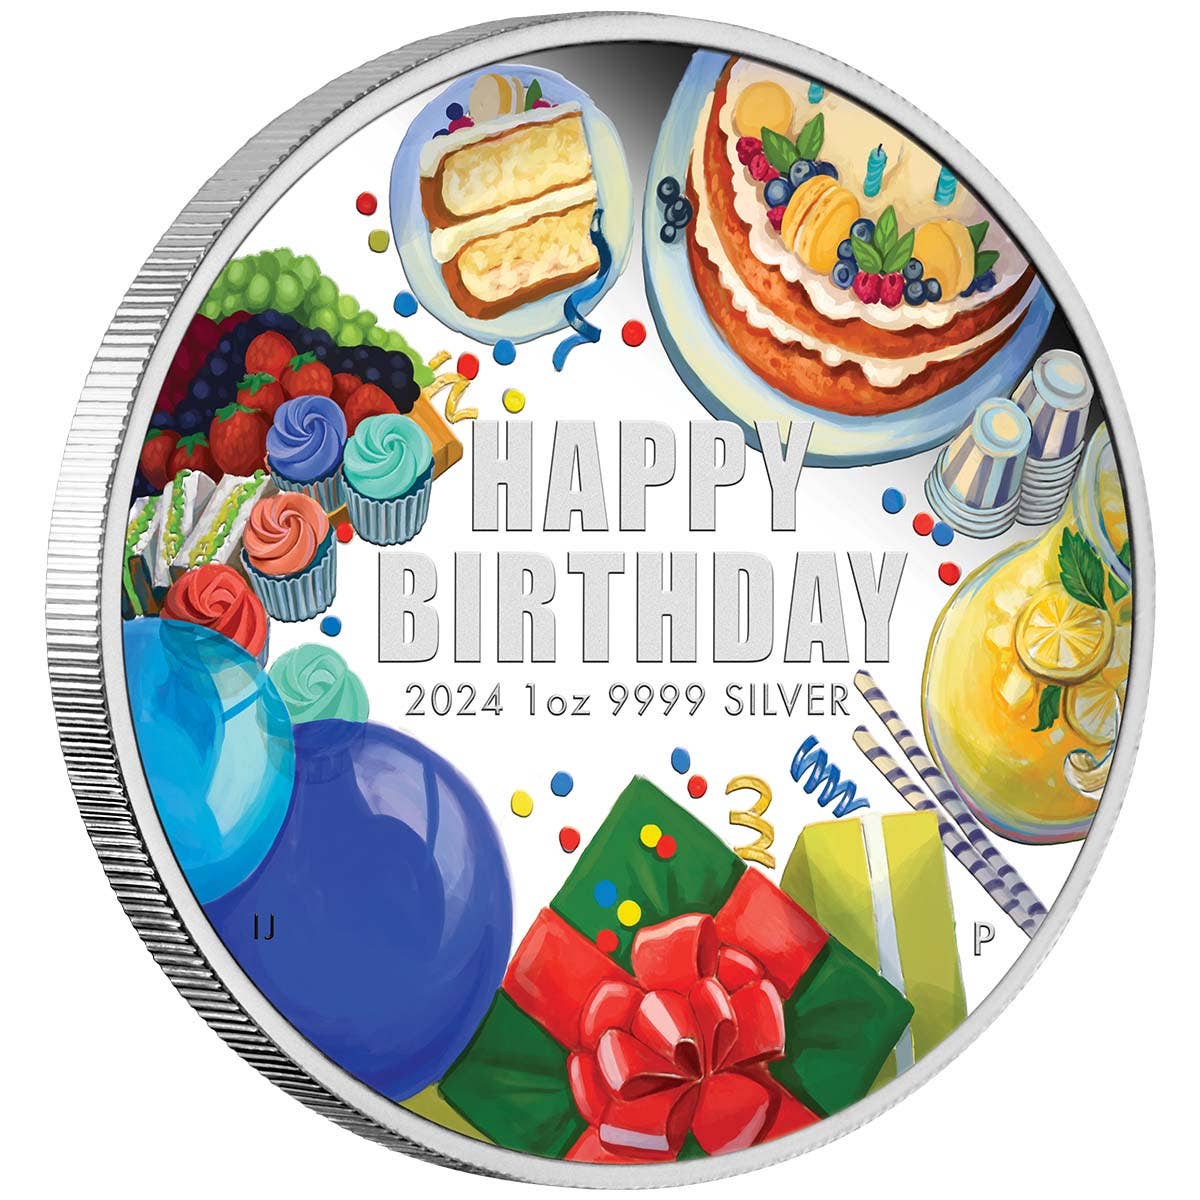 Happy Birthday 2024 $1 Colour 1oz Silver Proof Coin